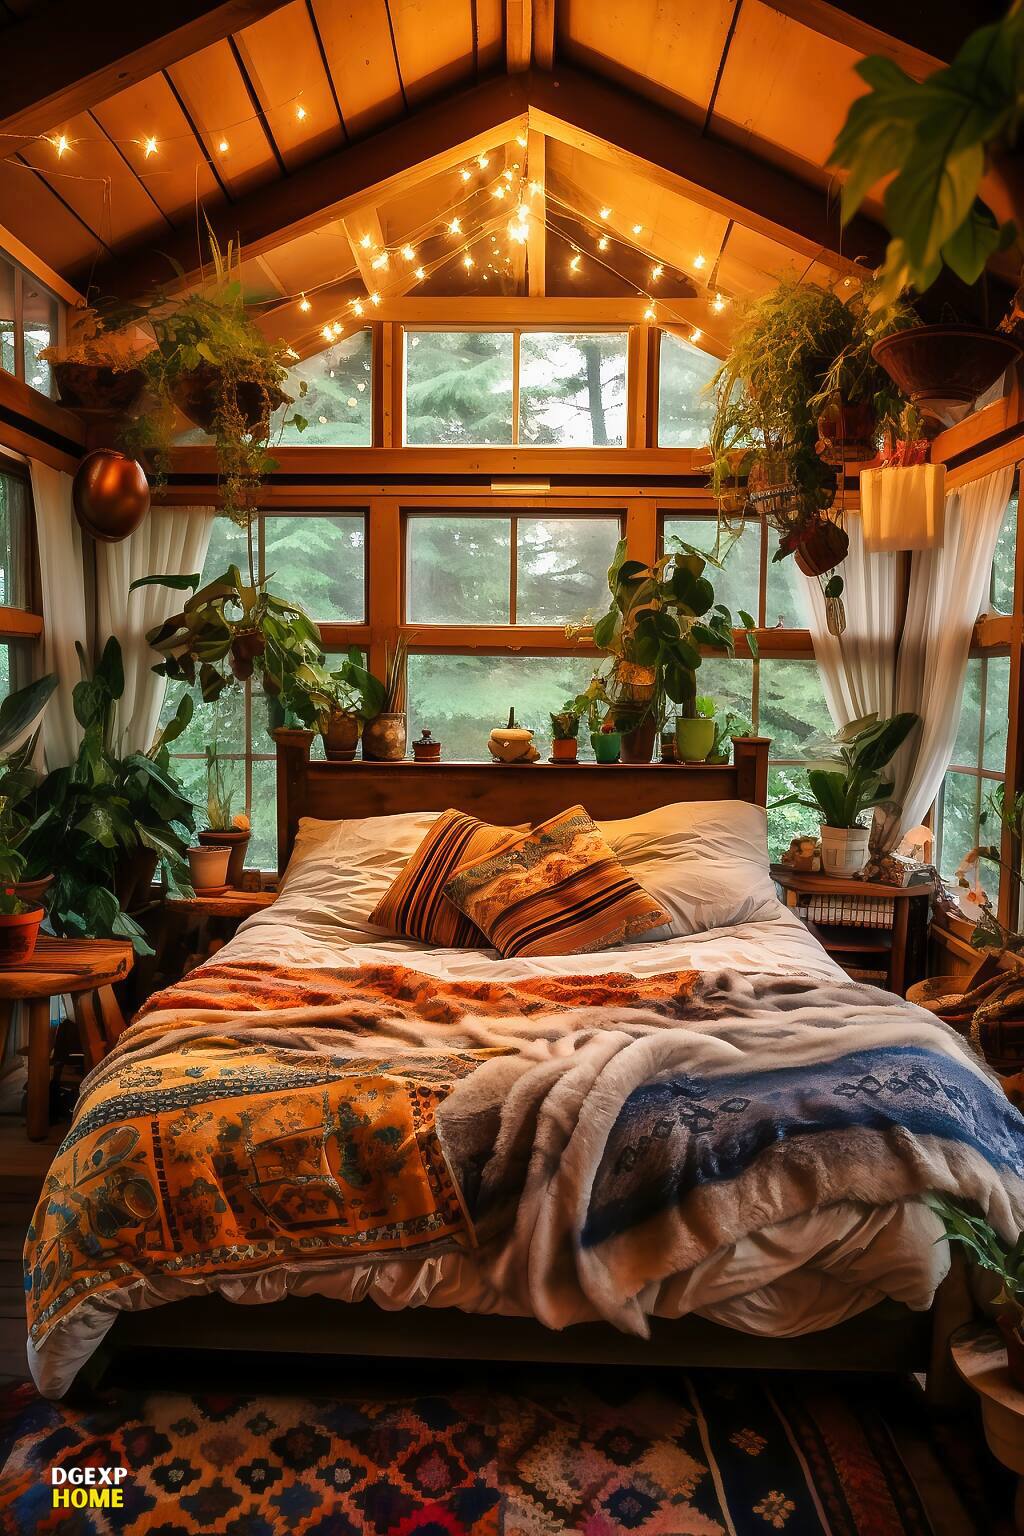 Farmhouse Bedroom With Fairy Lights Overhead, Vibrant Bedding, And Surrounding Greenery.